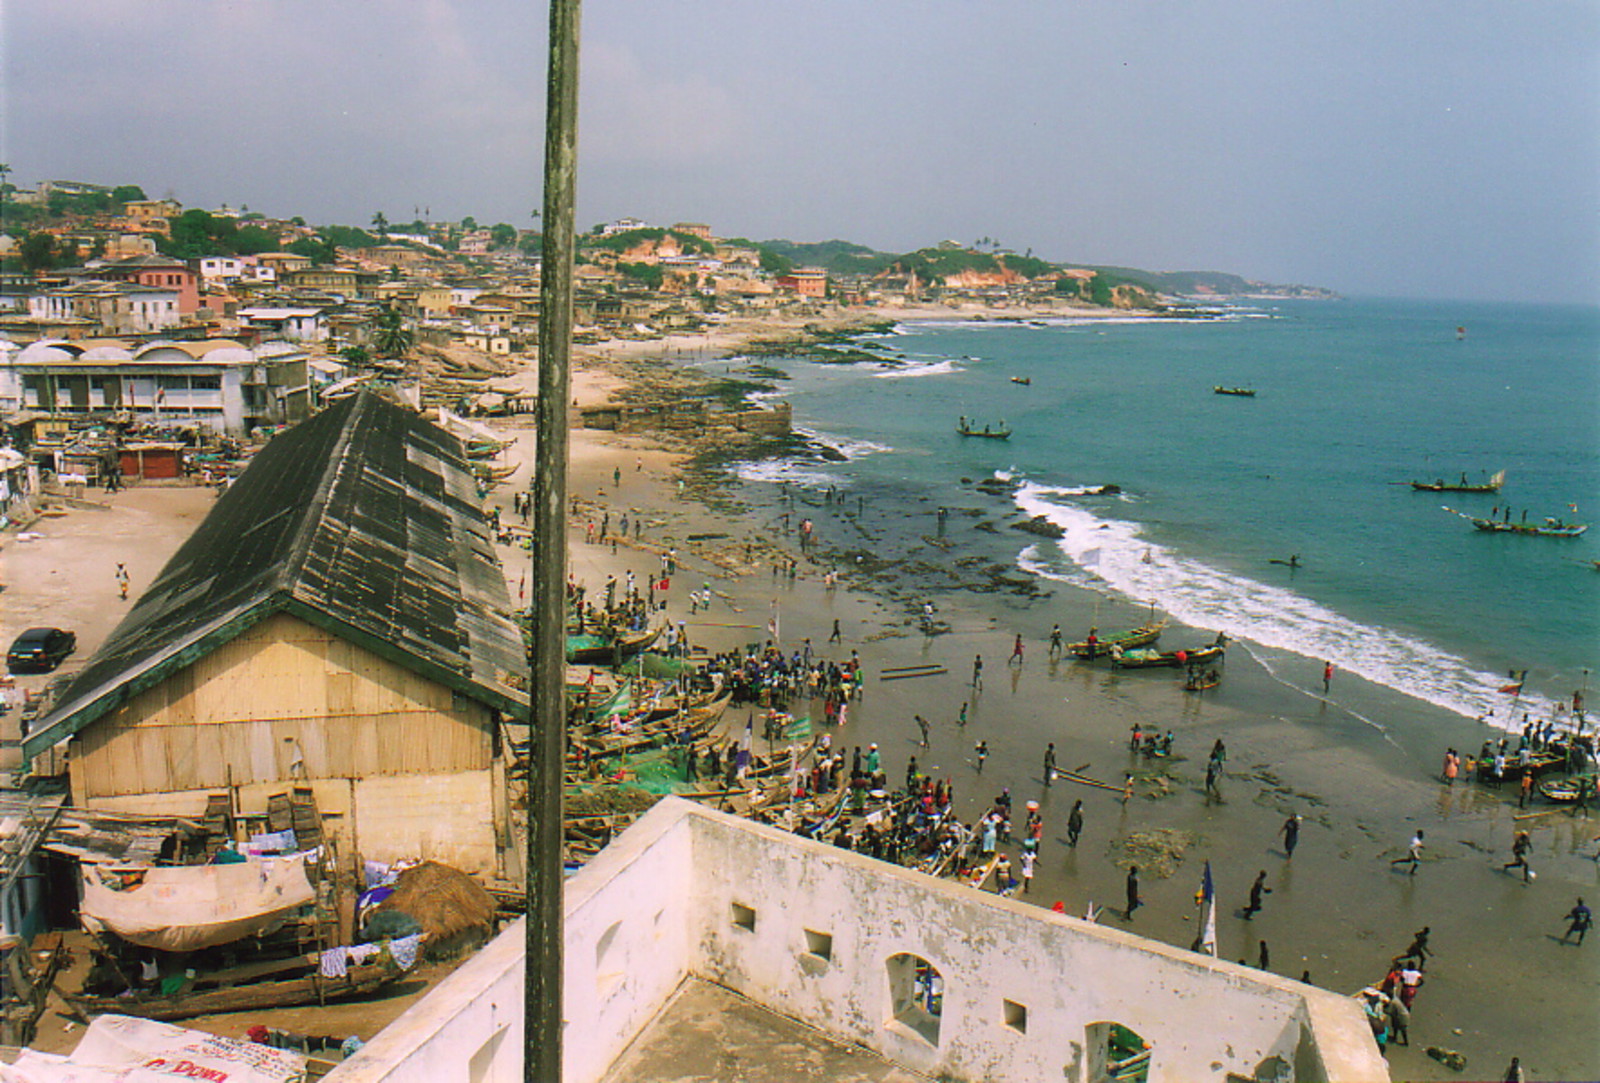 The view east from Cape Coast Castle